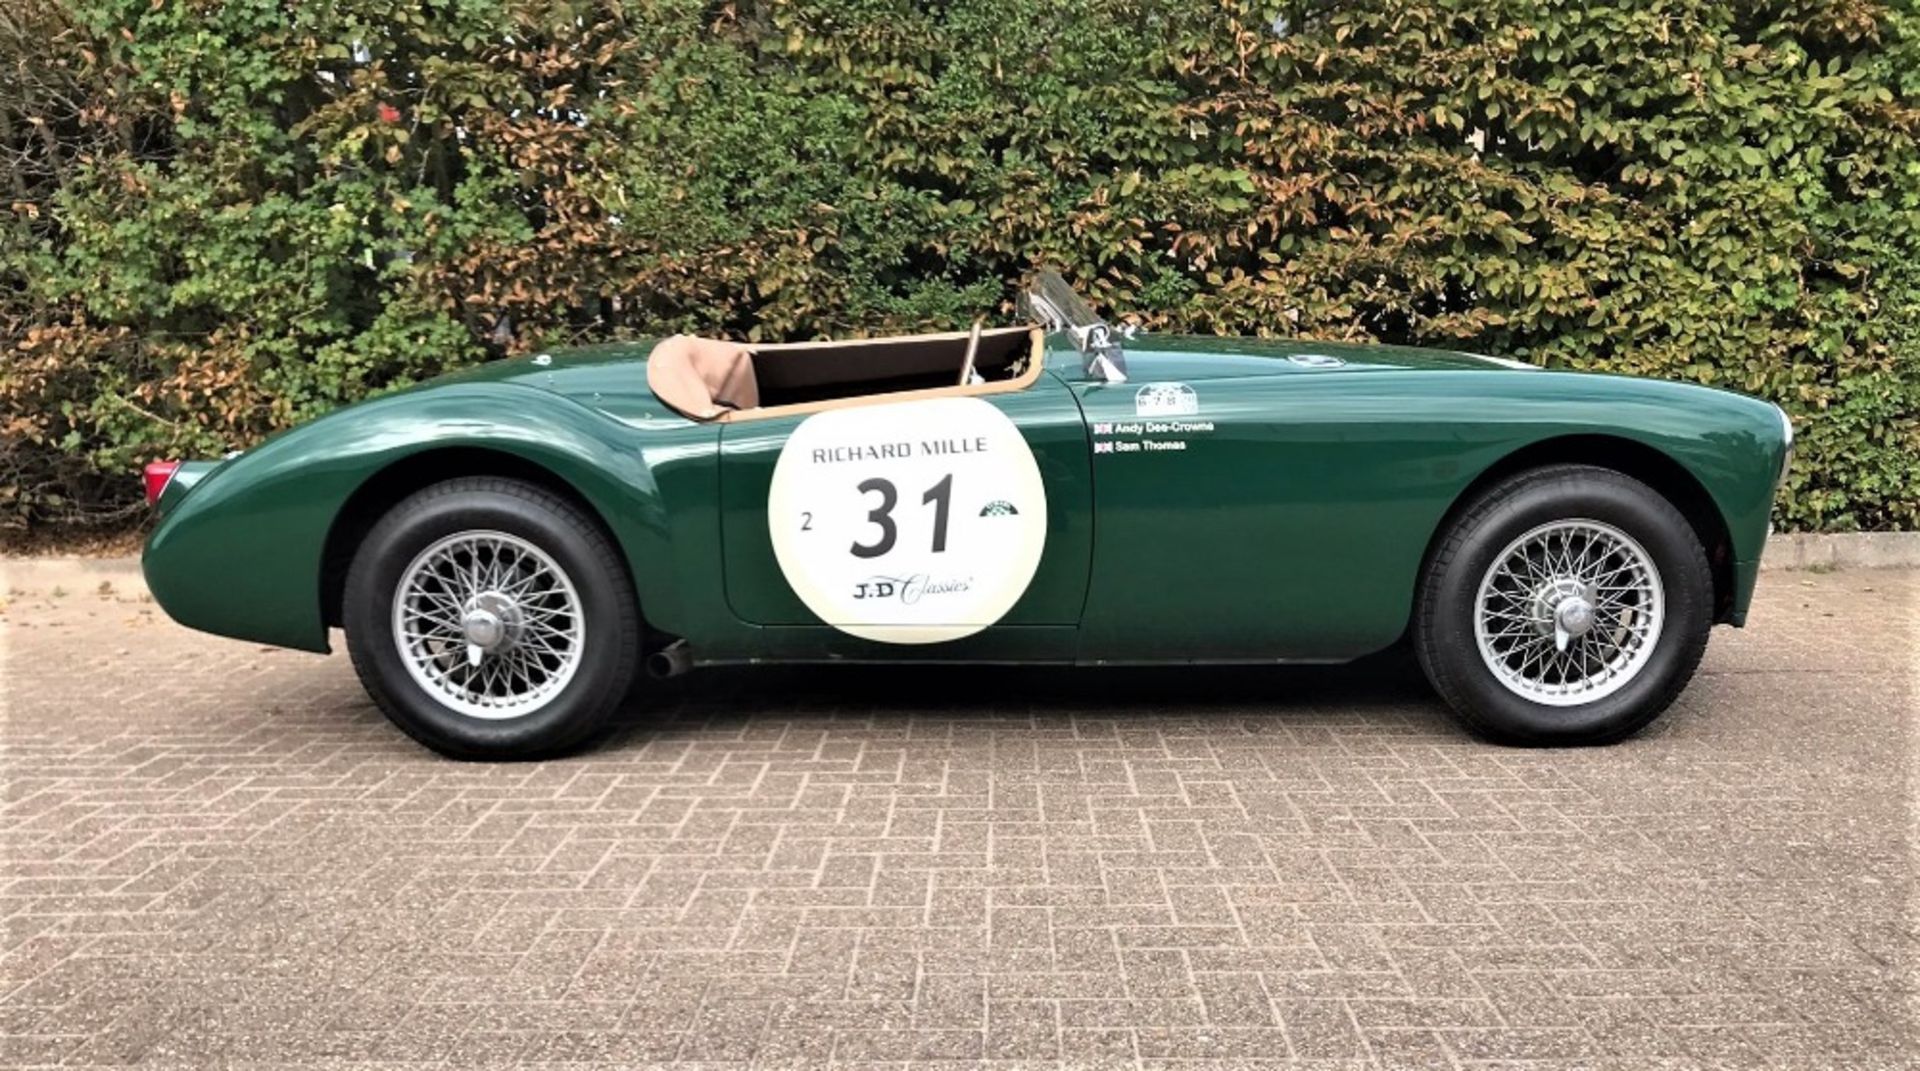 1958 MGA ROADSTER - CLASS WINNER OF LE MANS CLASSIC Registration Number: MSL 967 Chassis Number: - Image 5 of 9